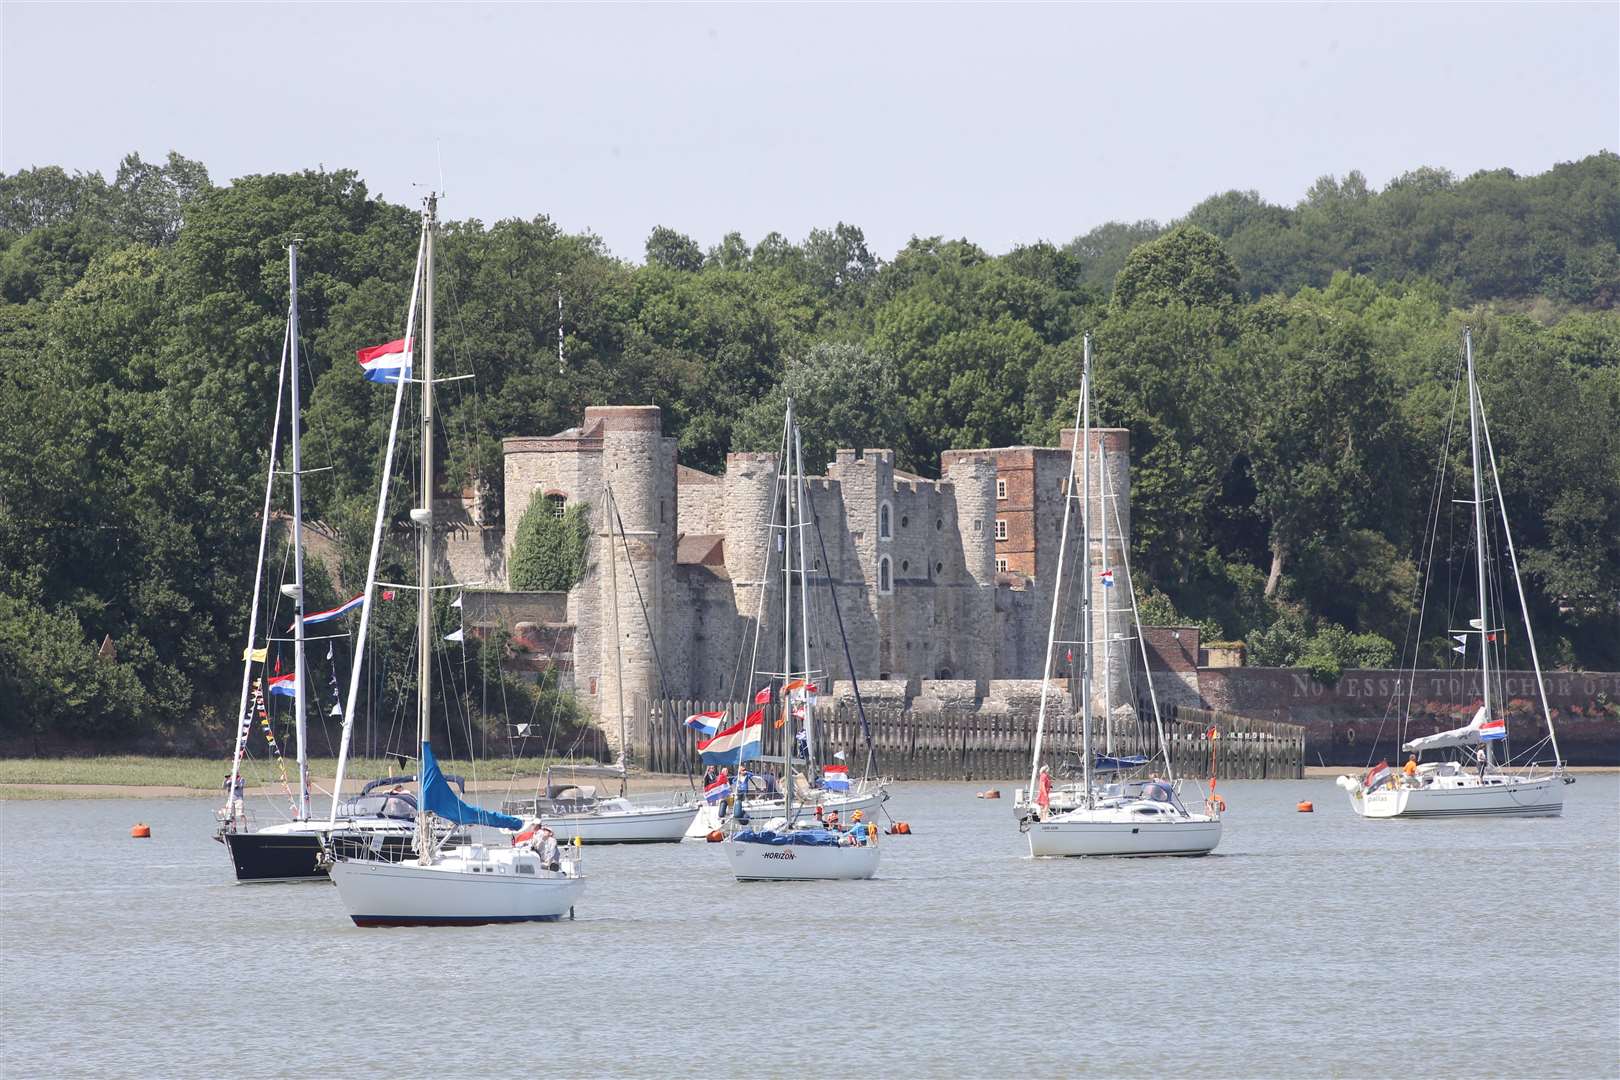 Upnor Castle, on the River Medway, as part of commemorations for the 350th anniversary of the Battle of Medway